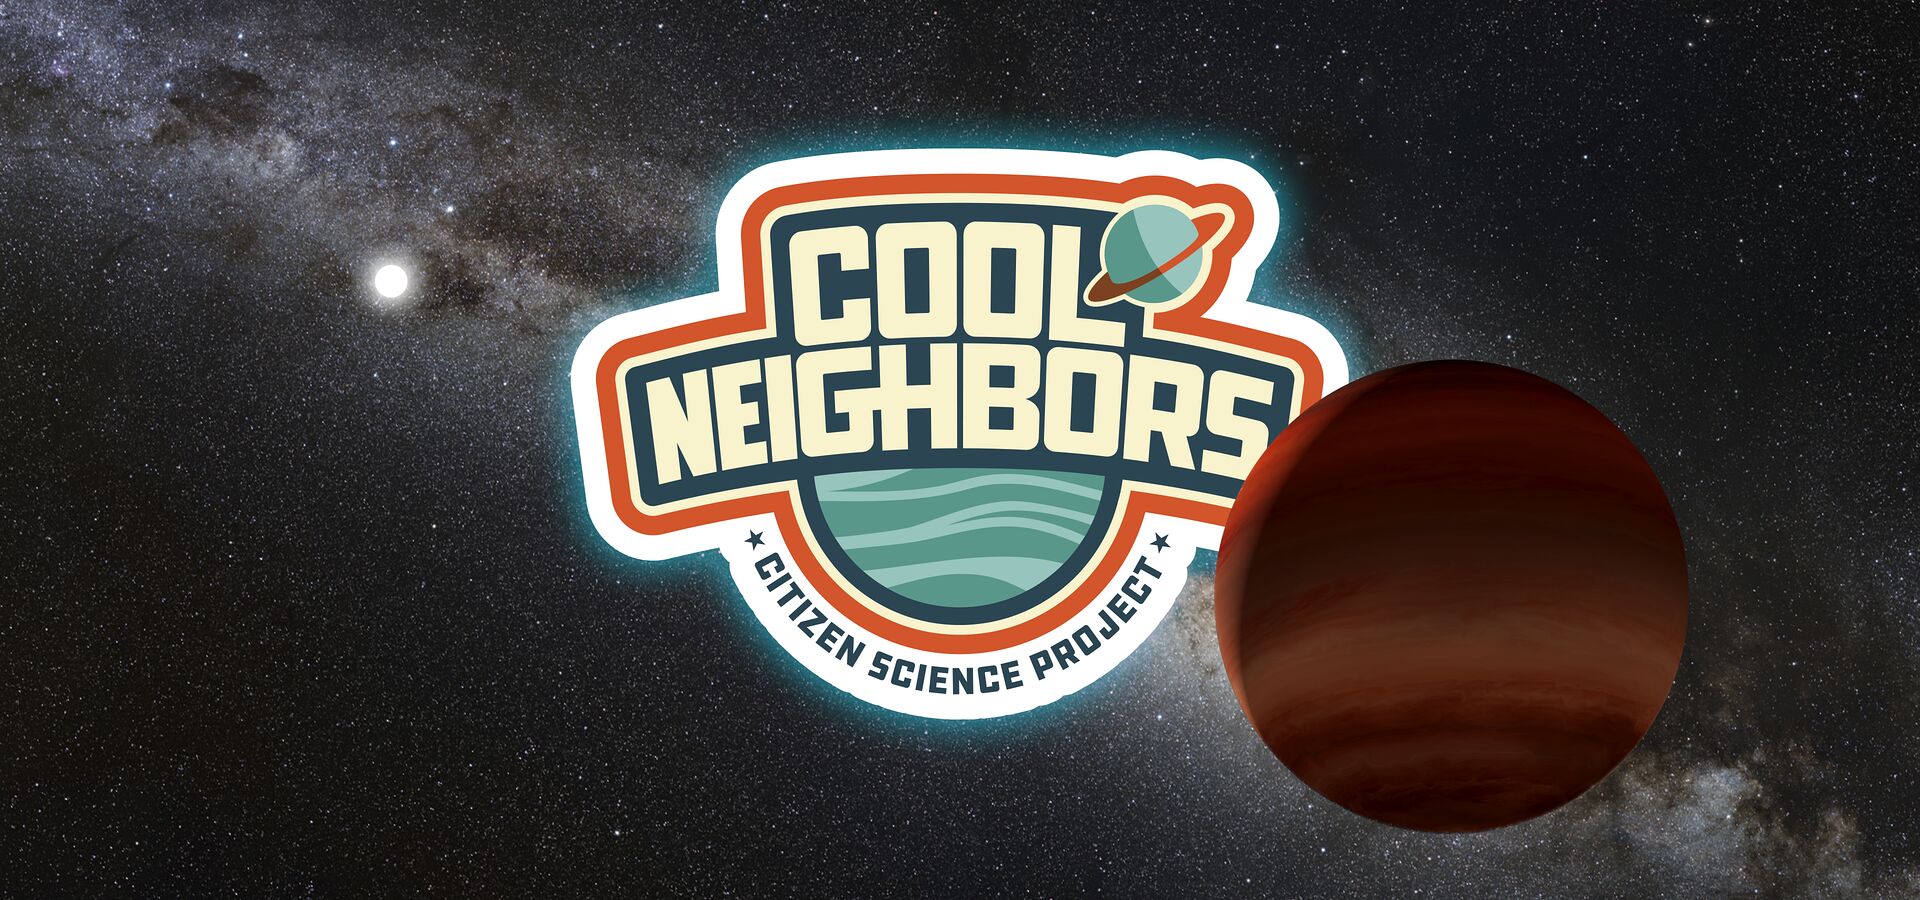 Newly Launched Backyard Worlds: Cool Neighbors Project Assembles Team of Citizen Scientists to Hunt for Brown Dwarfs in Our Cosmic Backyard